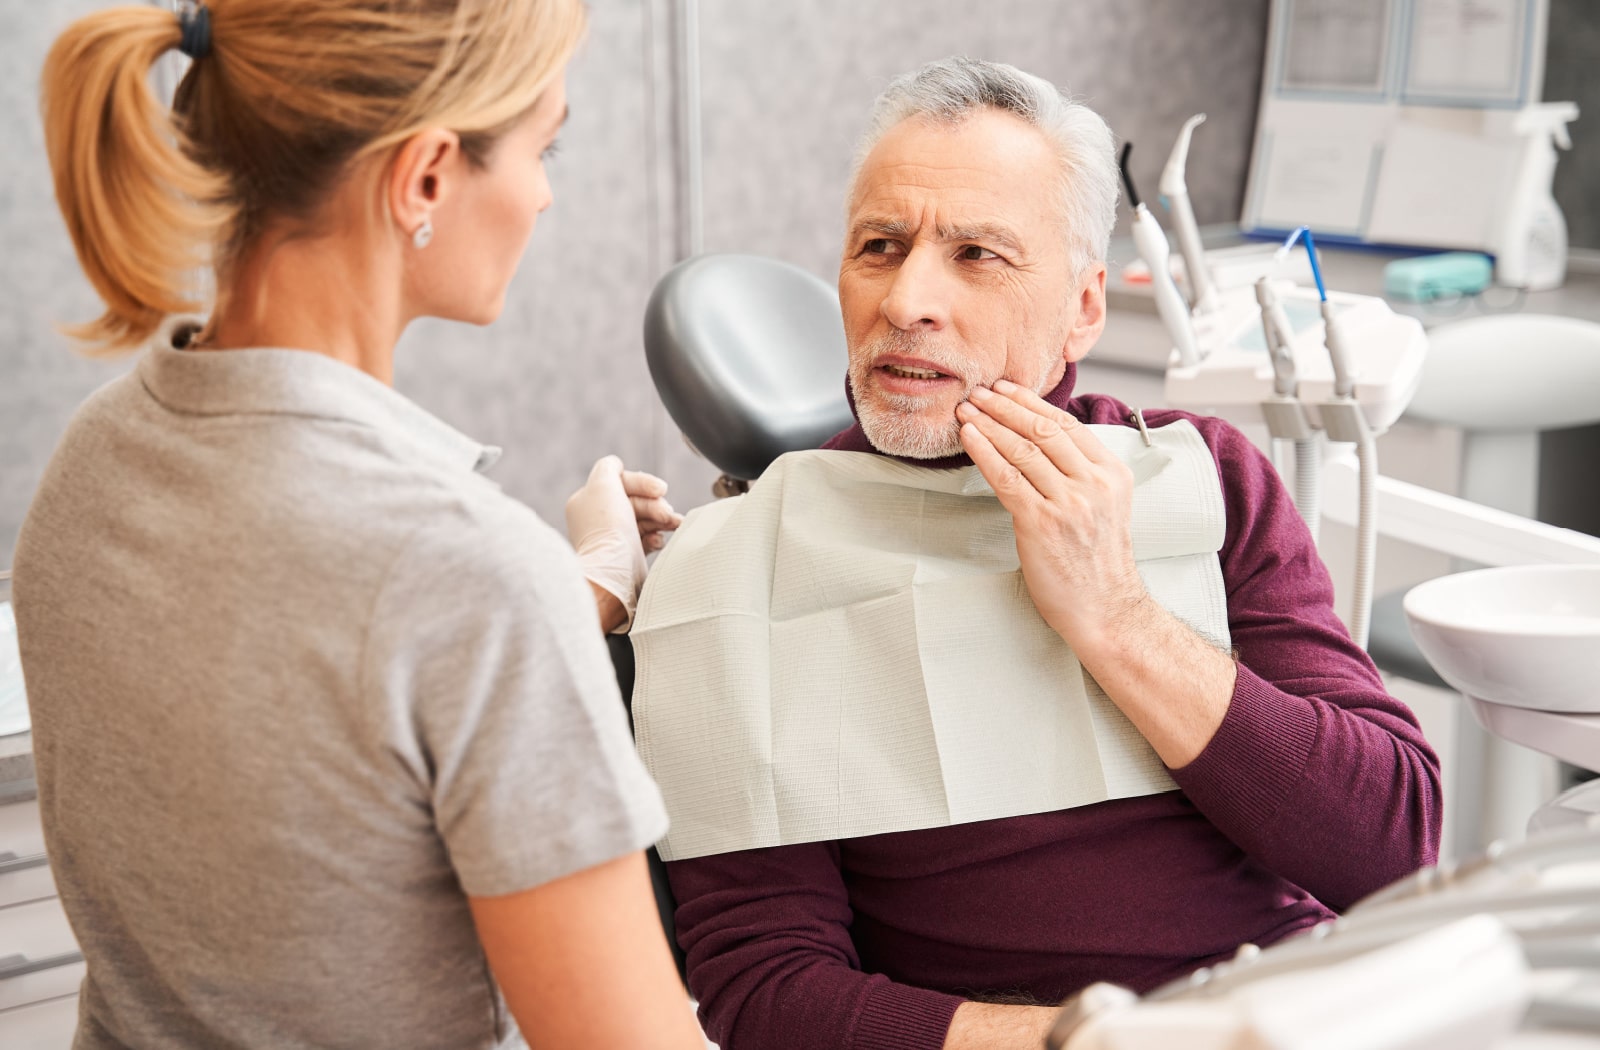 A man discusses his tooth pain with a dental hygienist at his dentist office.